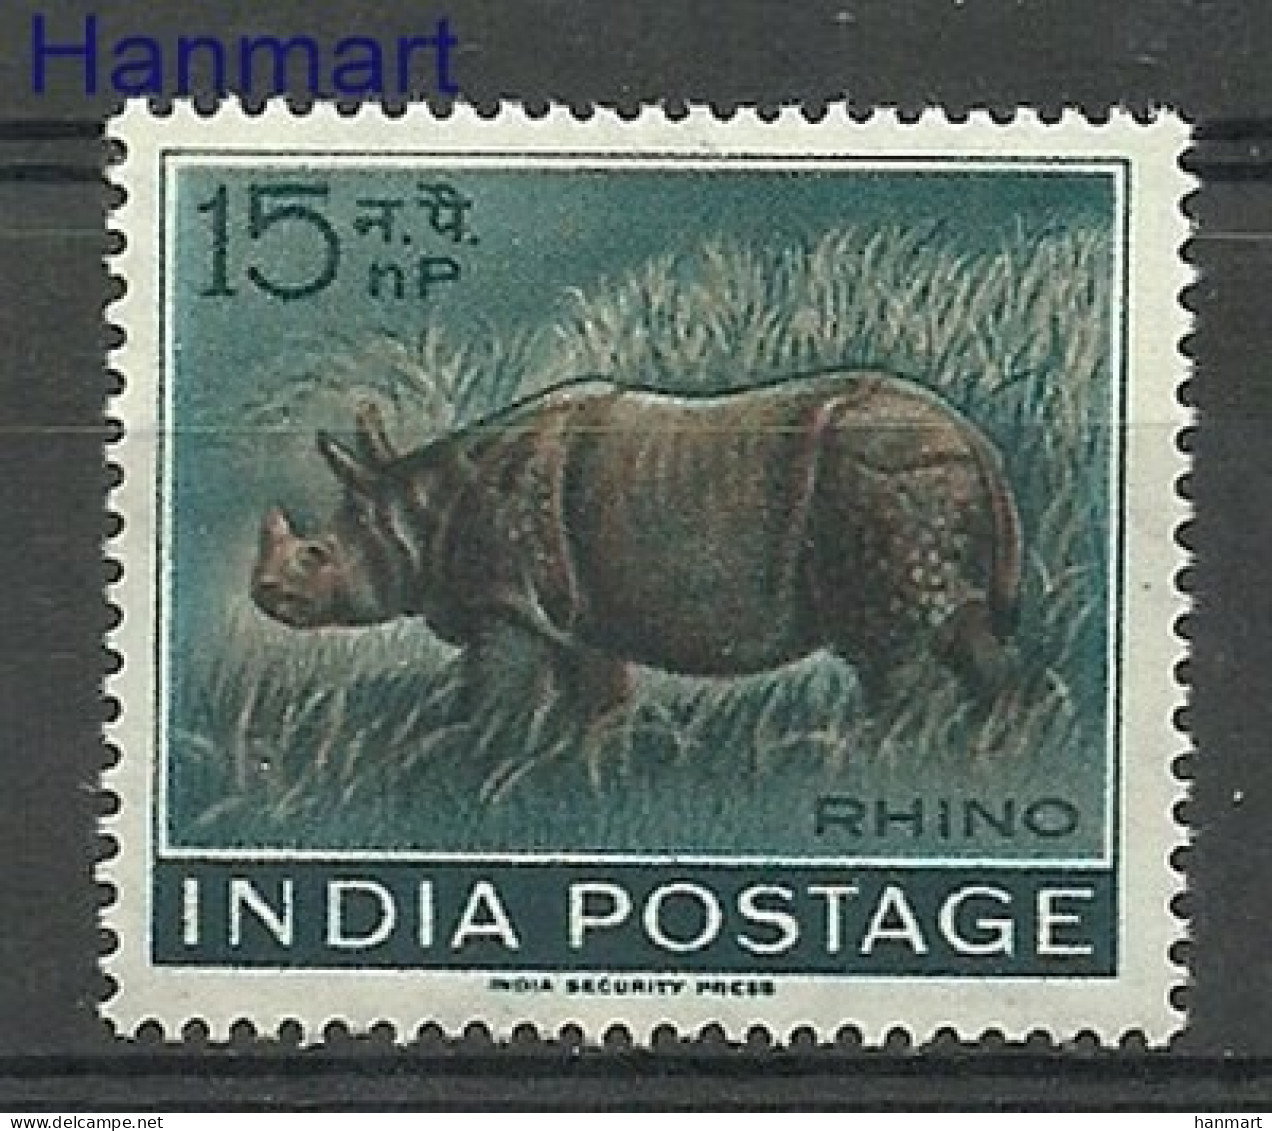 India 1962 Mi 346 MNH  (ZS8 IND346) - Other